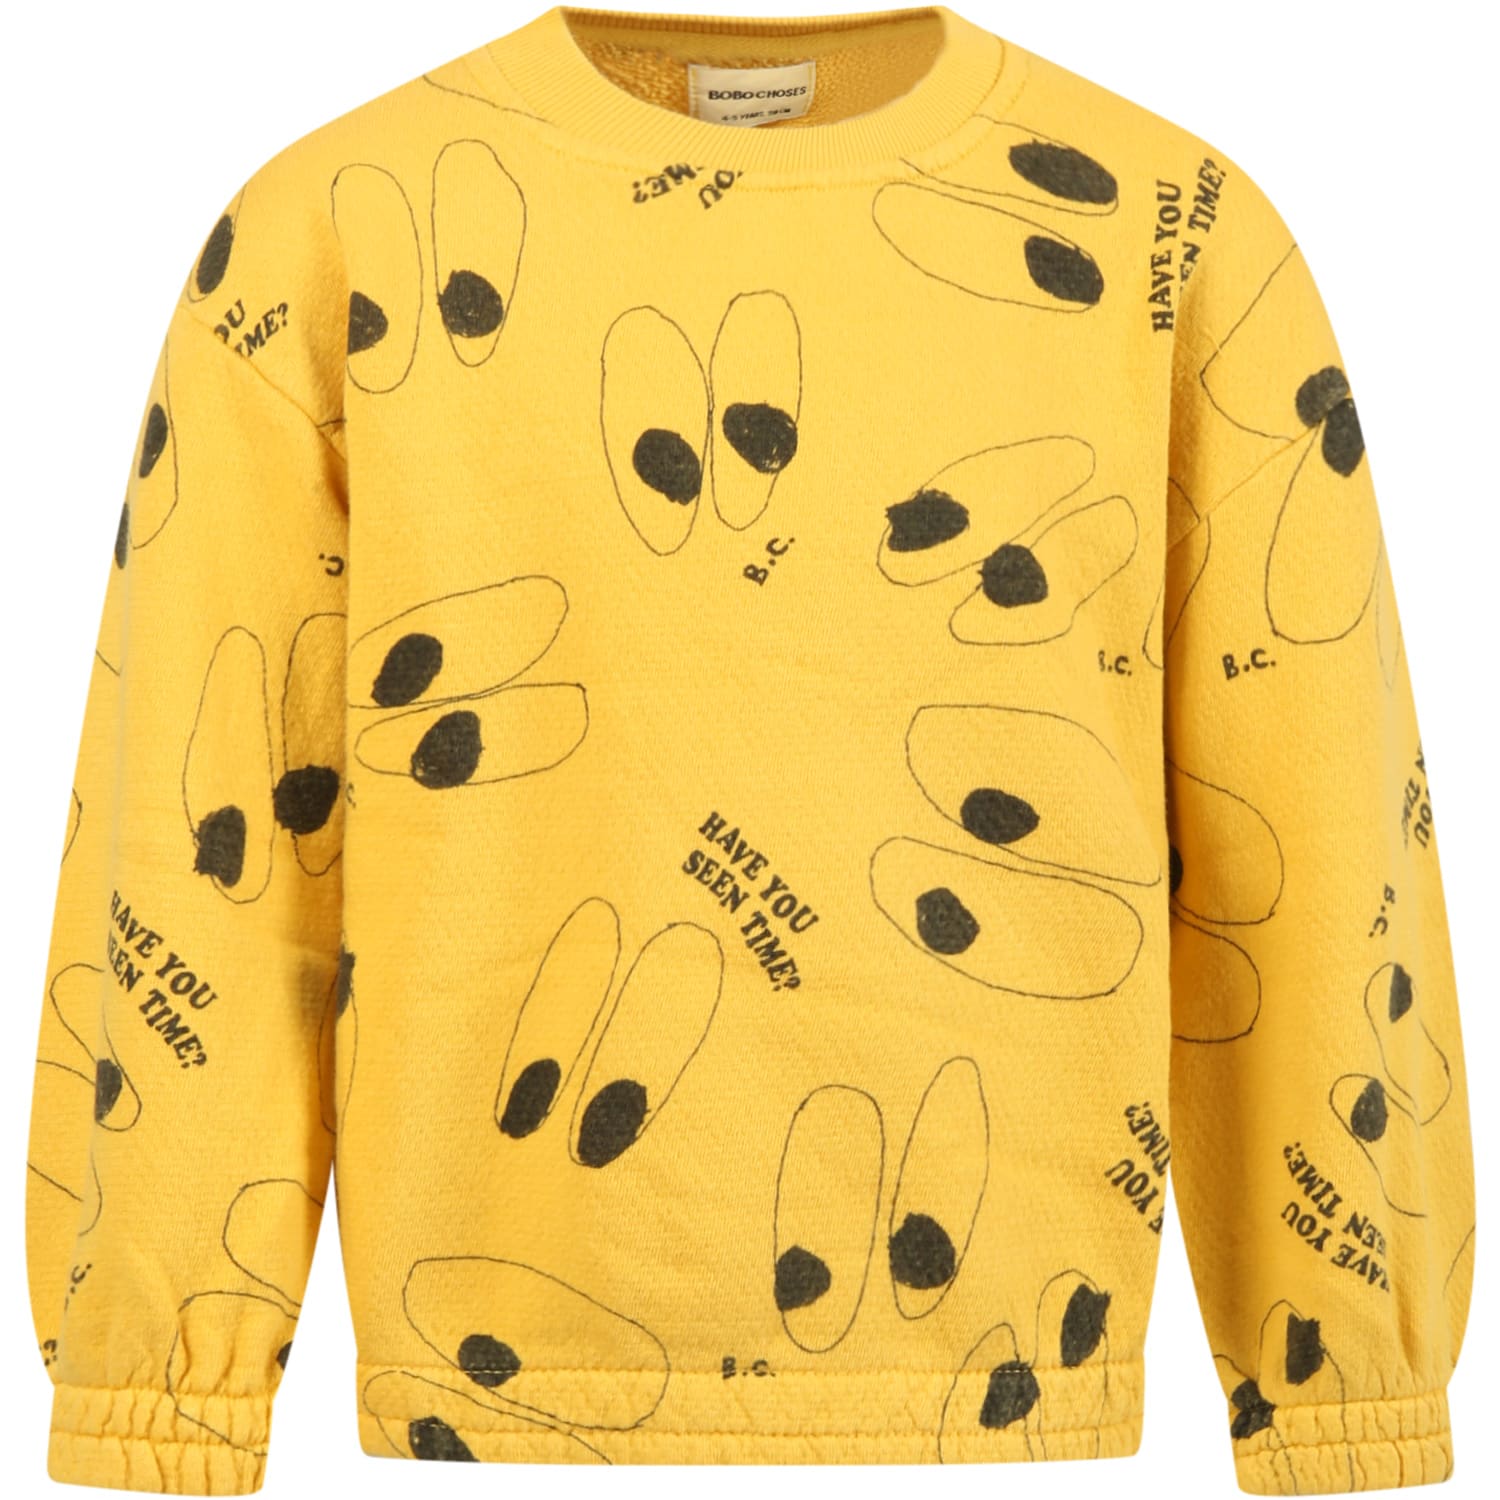 Bobo Choses Yellow Sweatshirt For Kids With Black Eyes And Logo